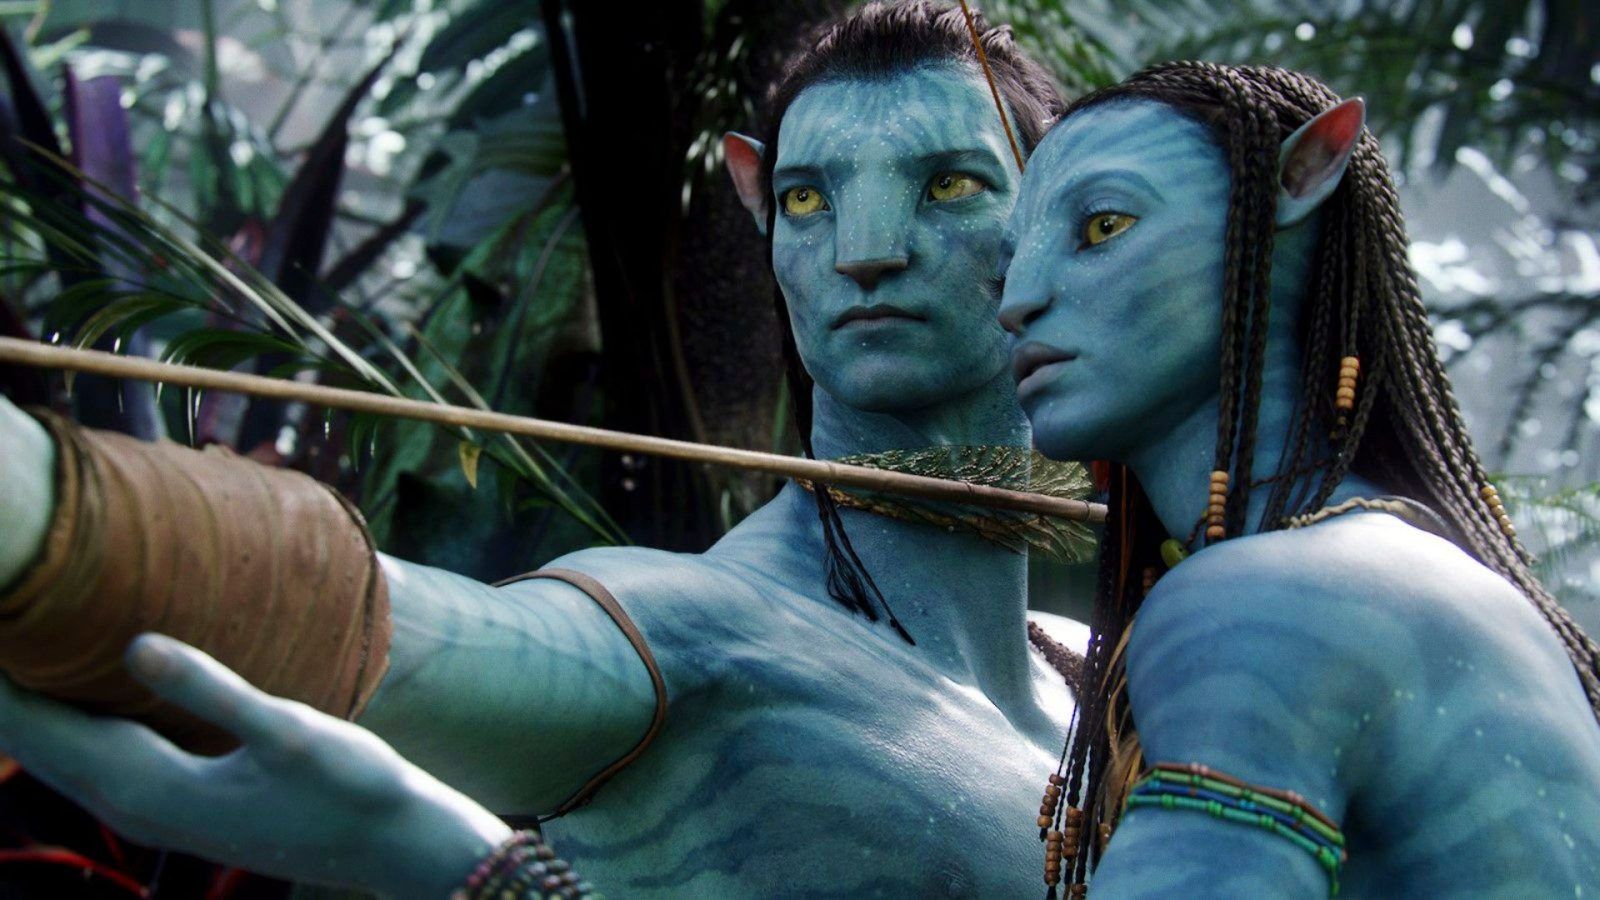 PostAvatar depression syndrome why do fans feel blue after watching  James Camerons film  Avatar The Way of Water  The Guardian